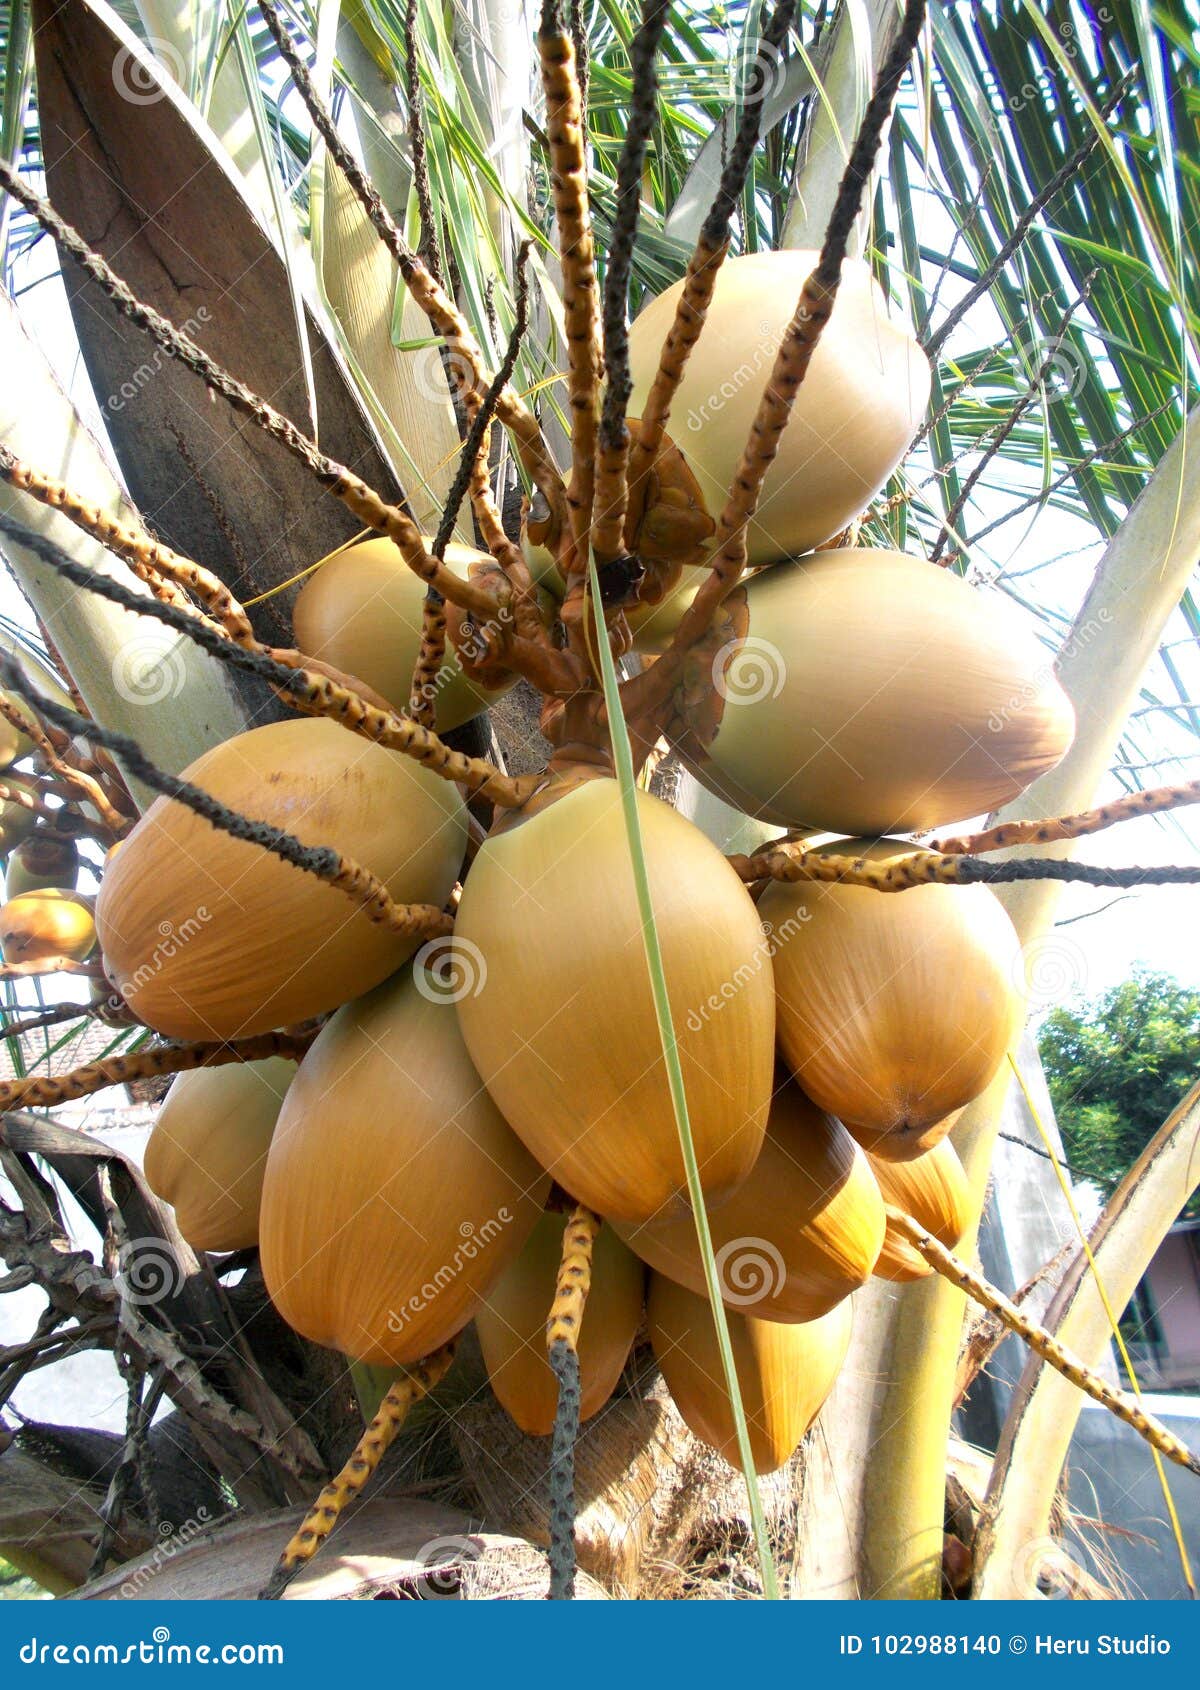 King Coconut Fruit Orange Brown Color on the Tree Stock Photo - Image ...